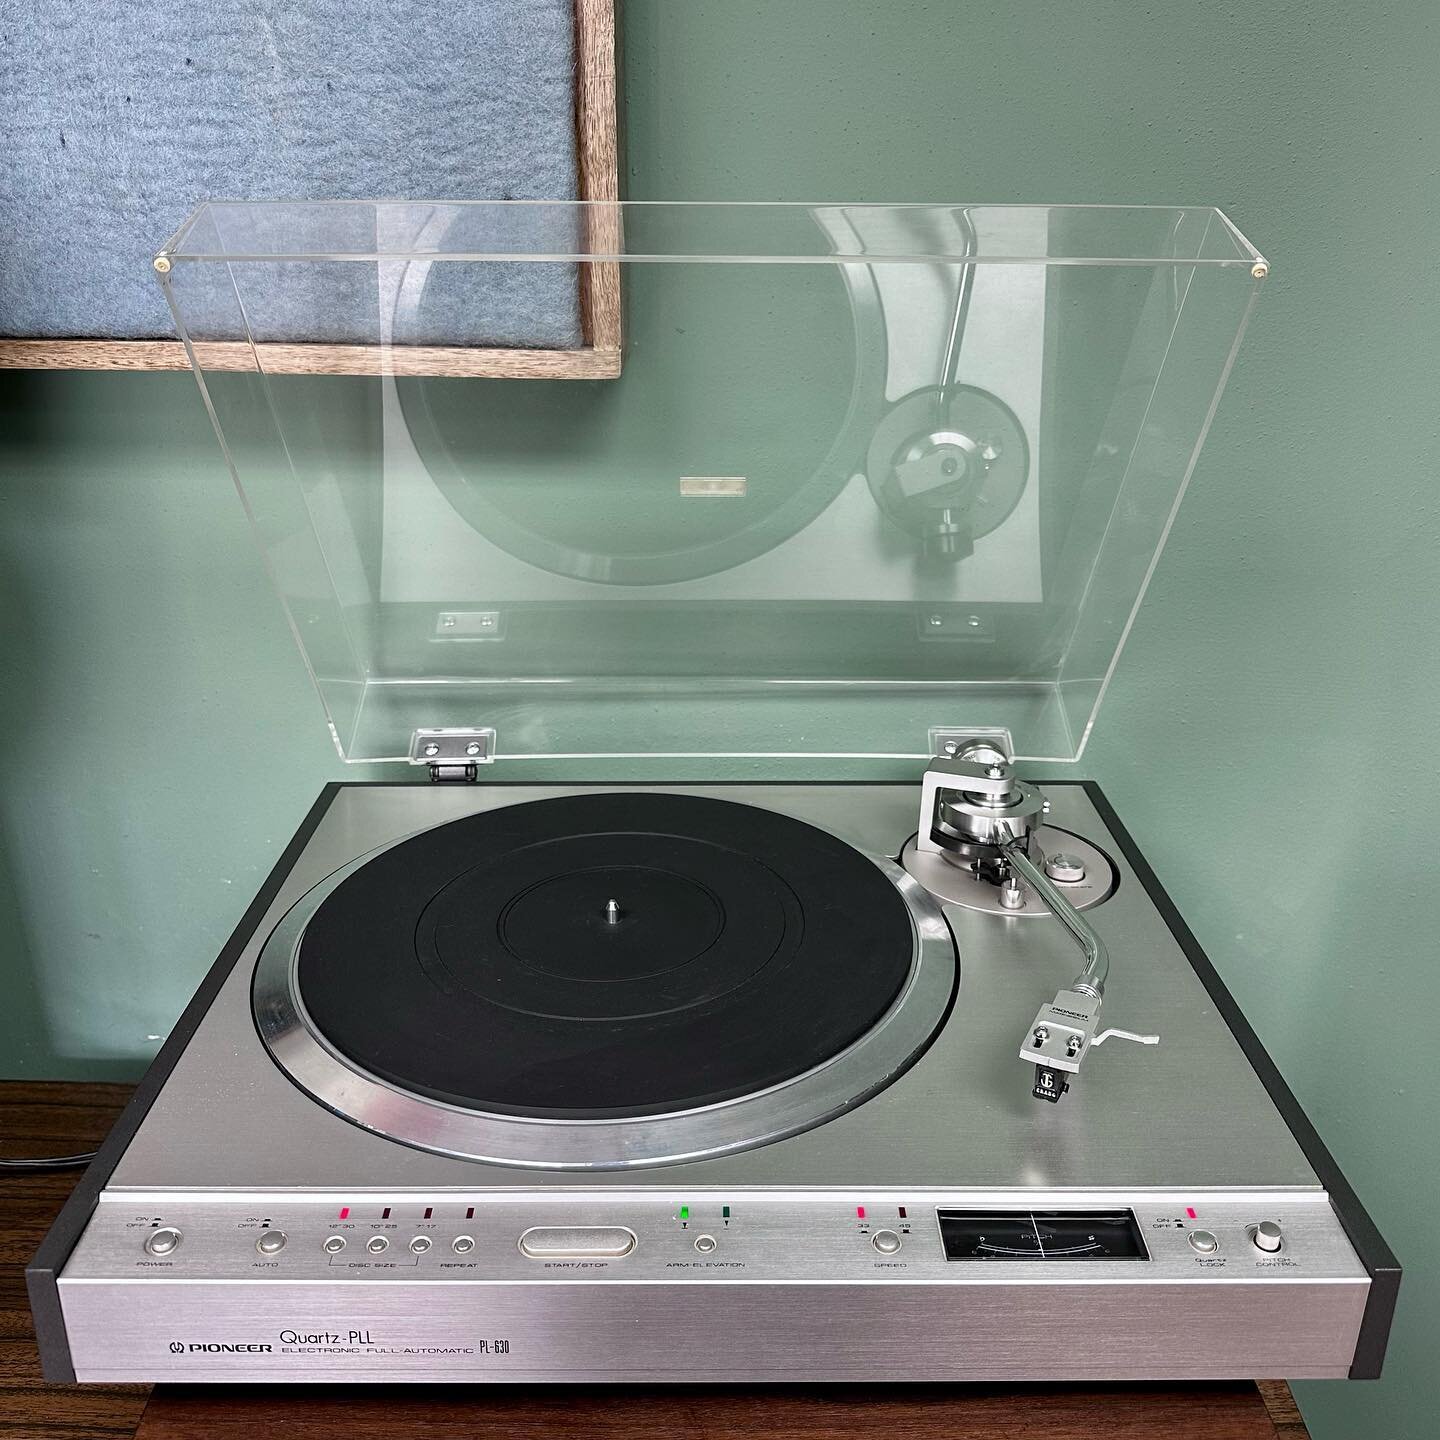 [AVAILABLE] When Pioneer put out the &ldquo;80&rdquo; series of receivers (SX-780, SX-980, SX-1280 etc.) they also released several turntables to compliment that new line. The top of the line offering of those turntables was todays piece, the Pioneer